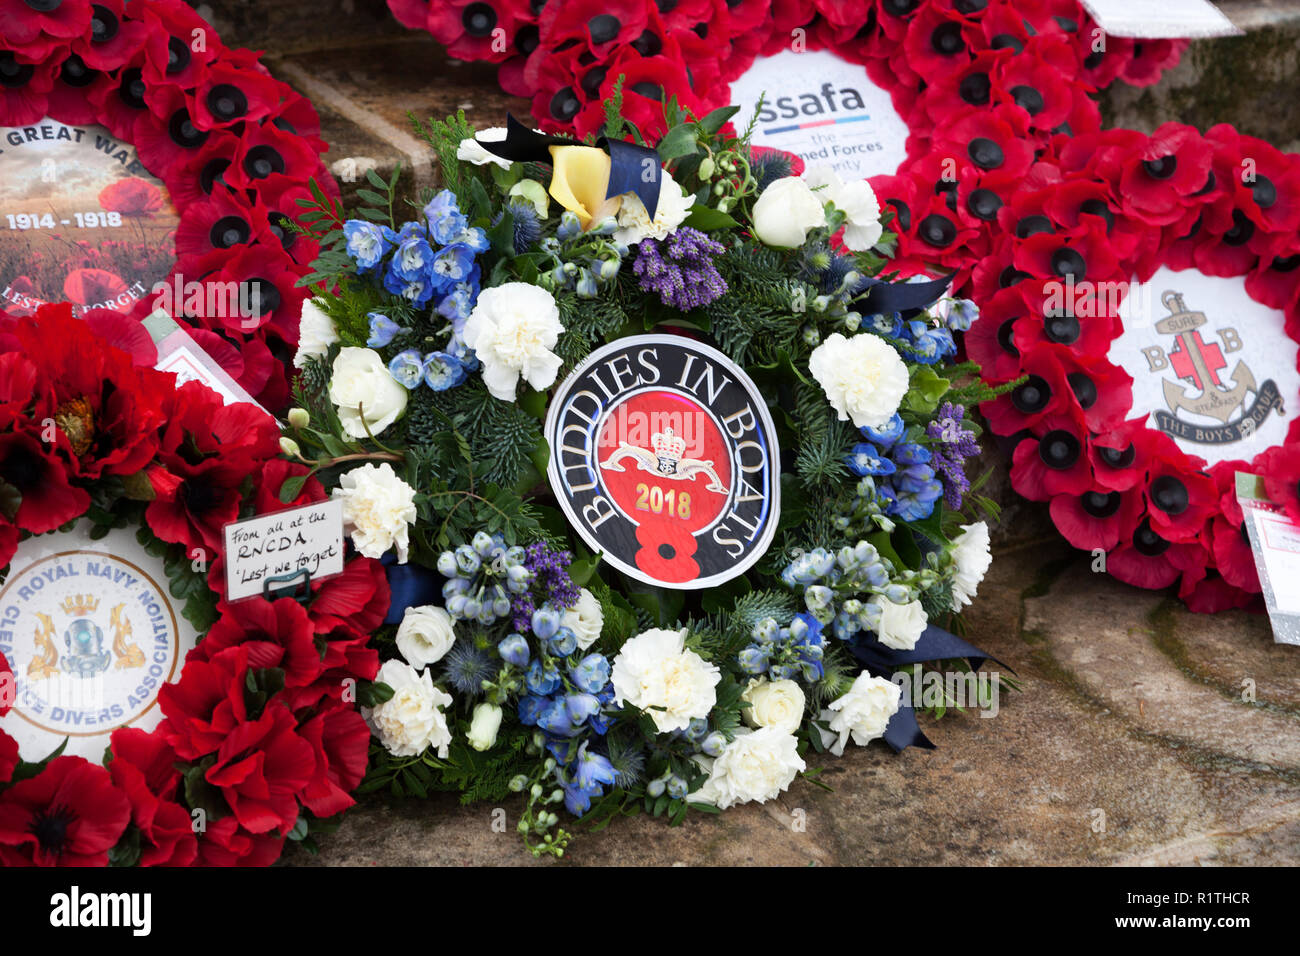 Wreath laid by the Submariners Association 'Buddies in Boats' at the Helensburgh War Memorial, Argyll, Scotland to remember the submariners lost in bo Stock Photo